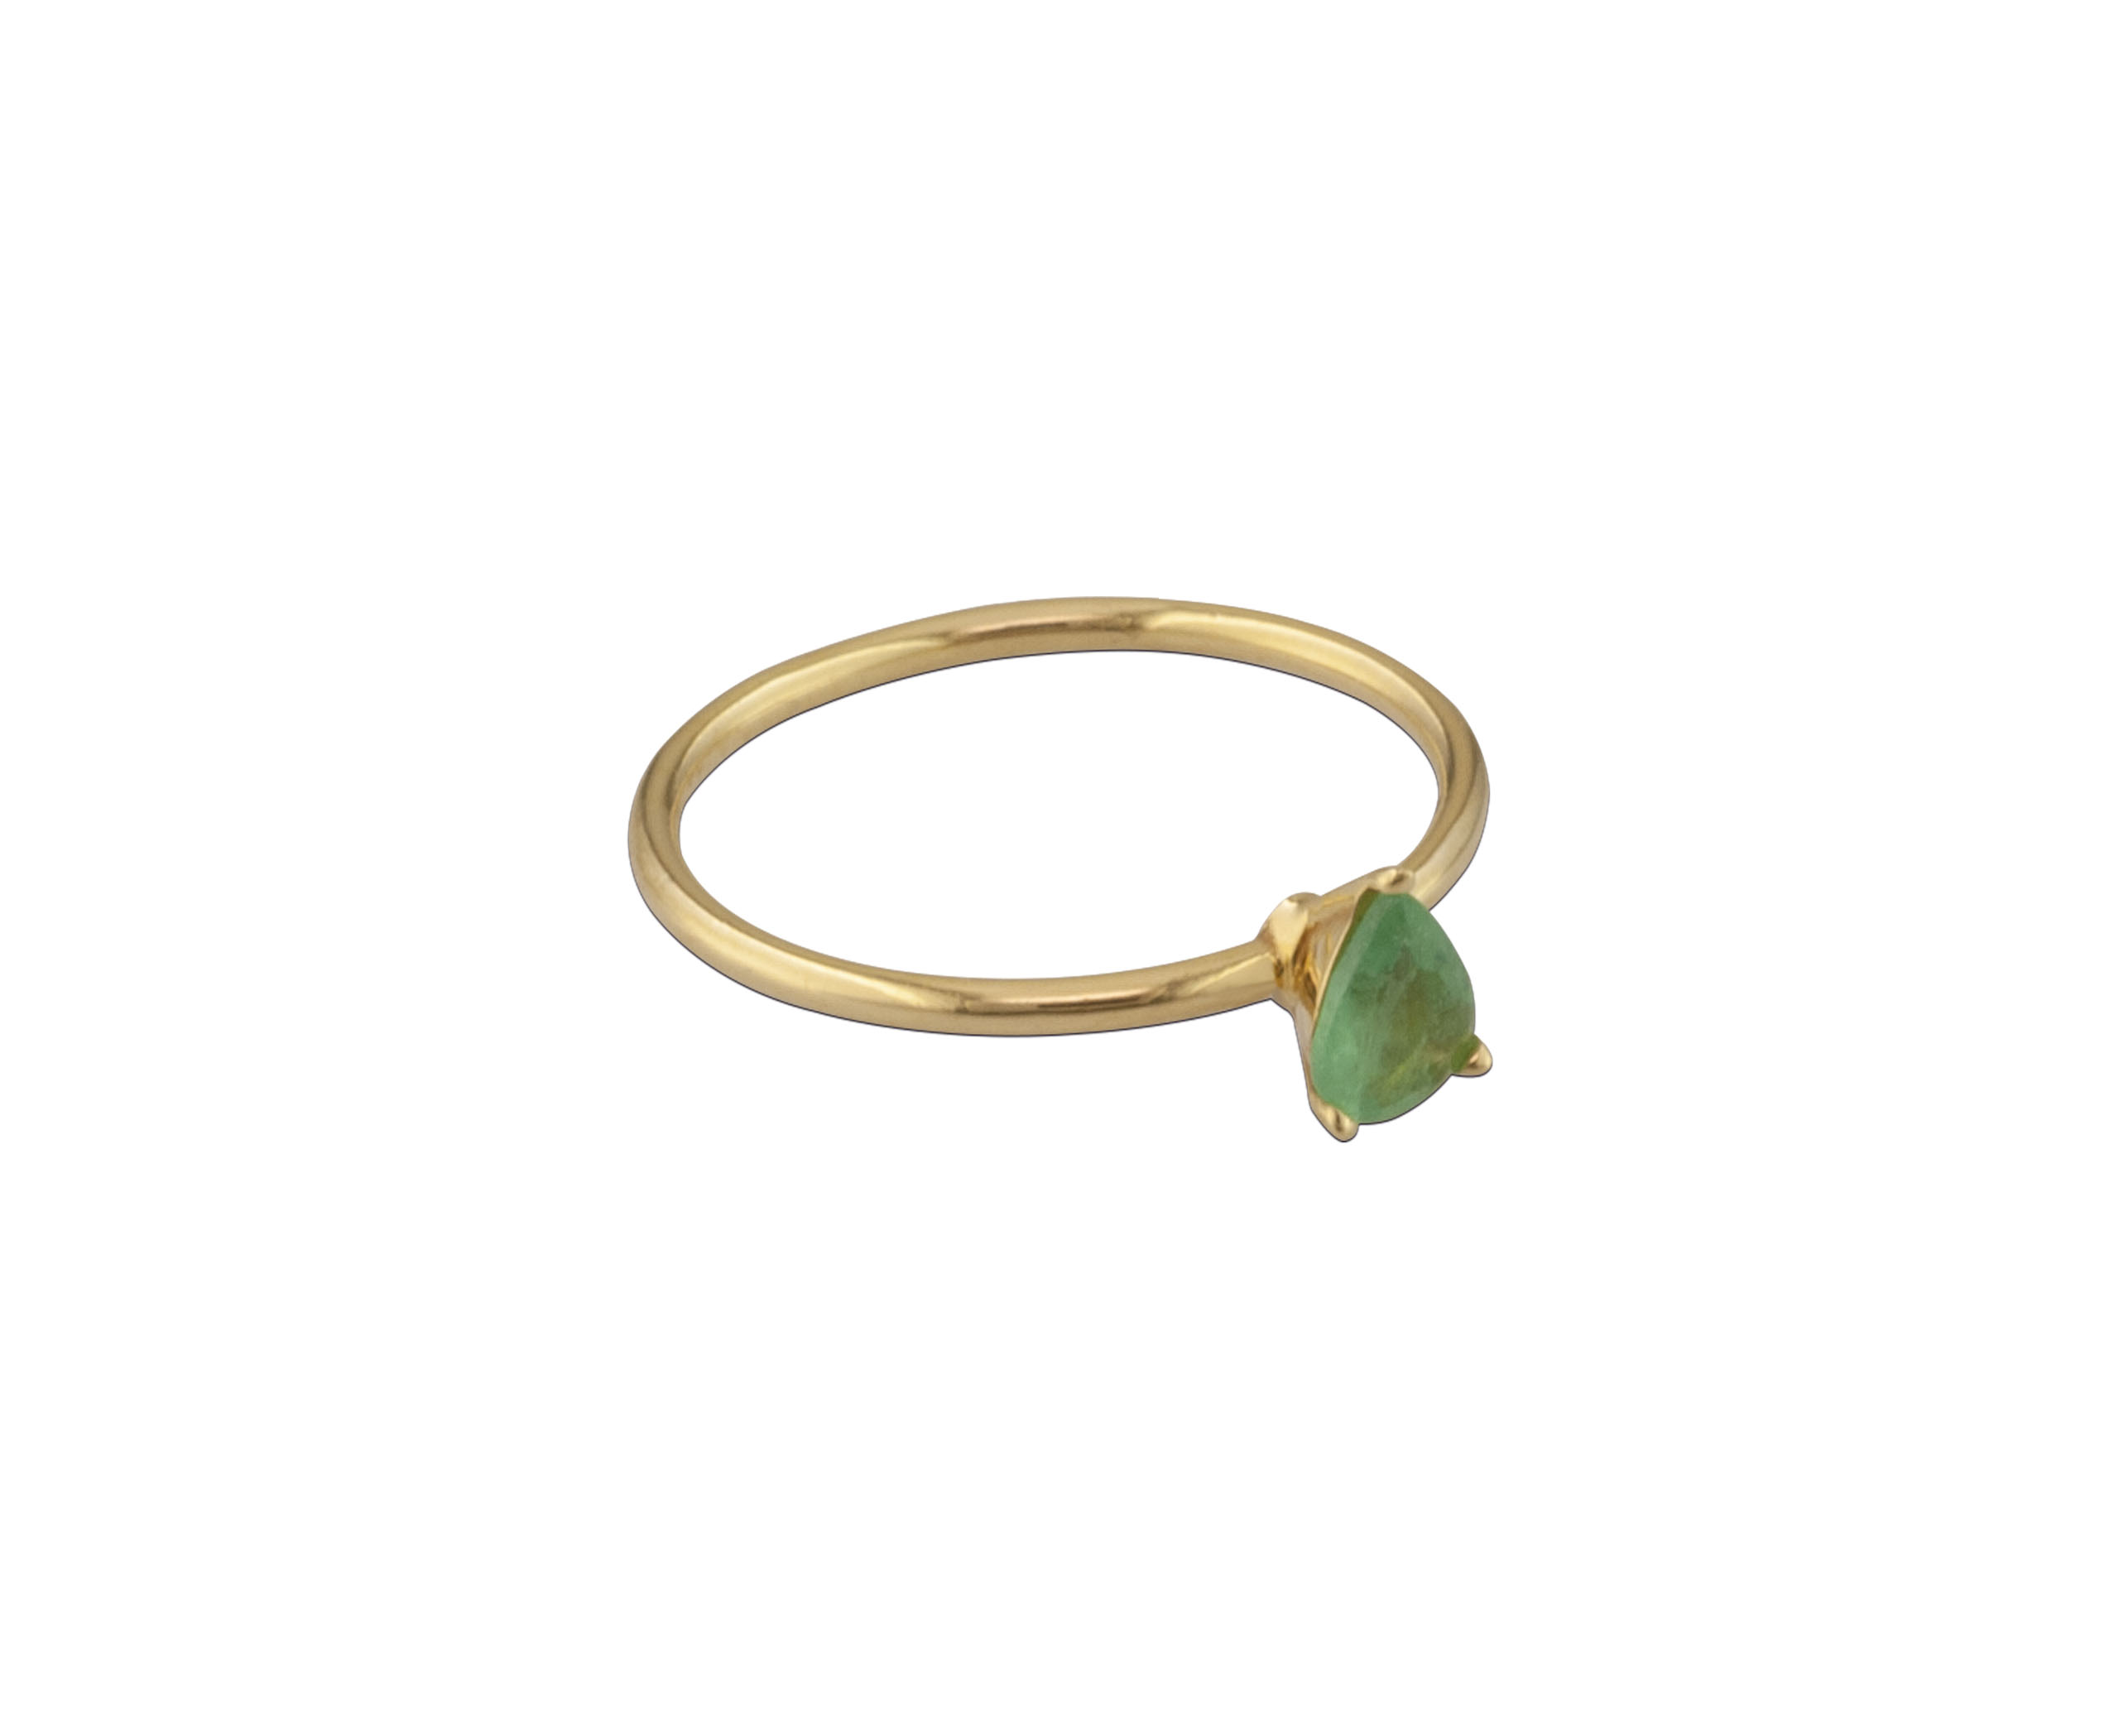 A Ring from “Joy Collection", a collection which includes a plethora of delicate and playful jewellery, perfect for children The Ring consists of a single small Emerald.